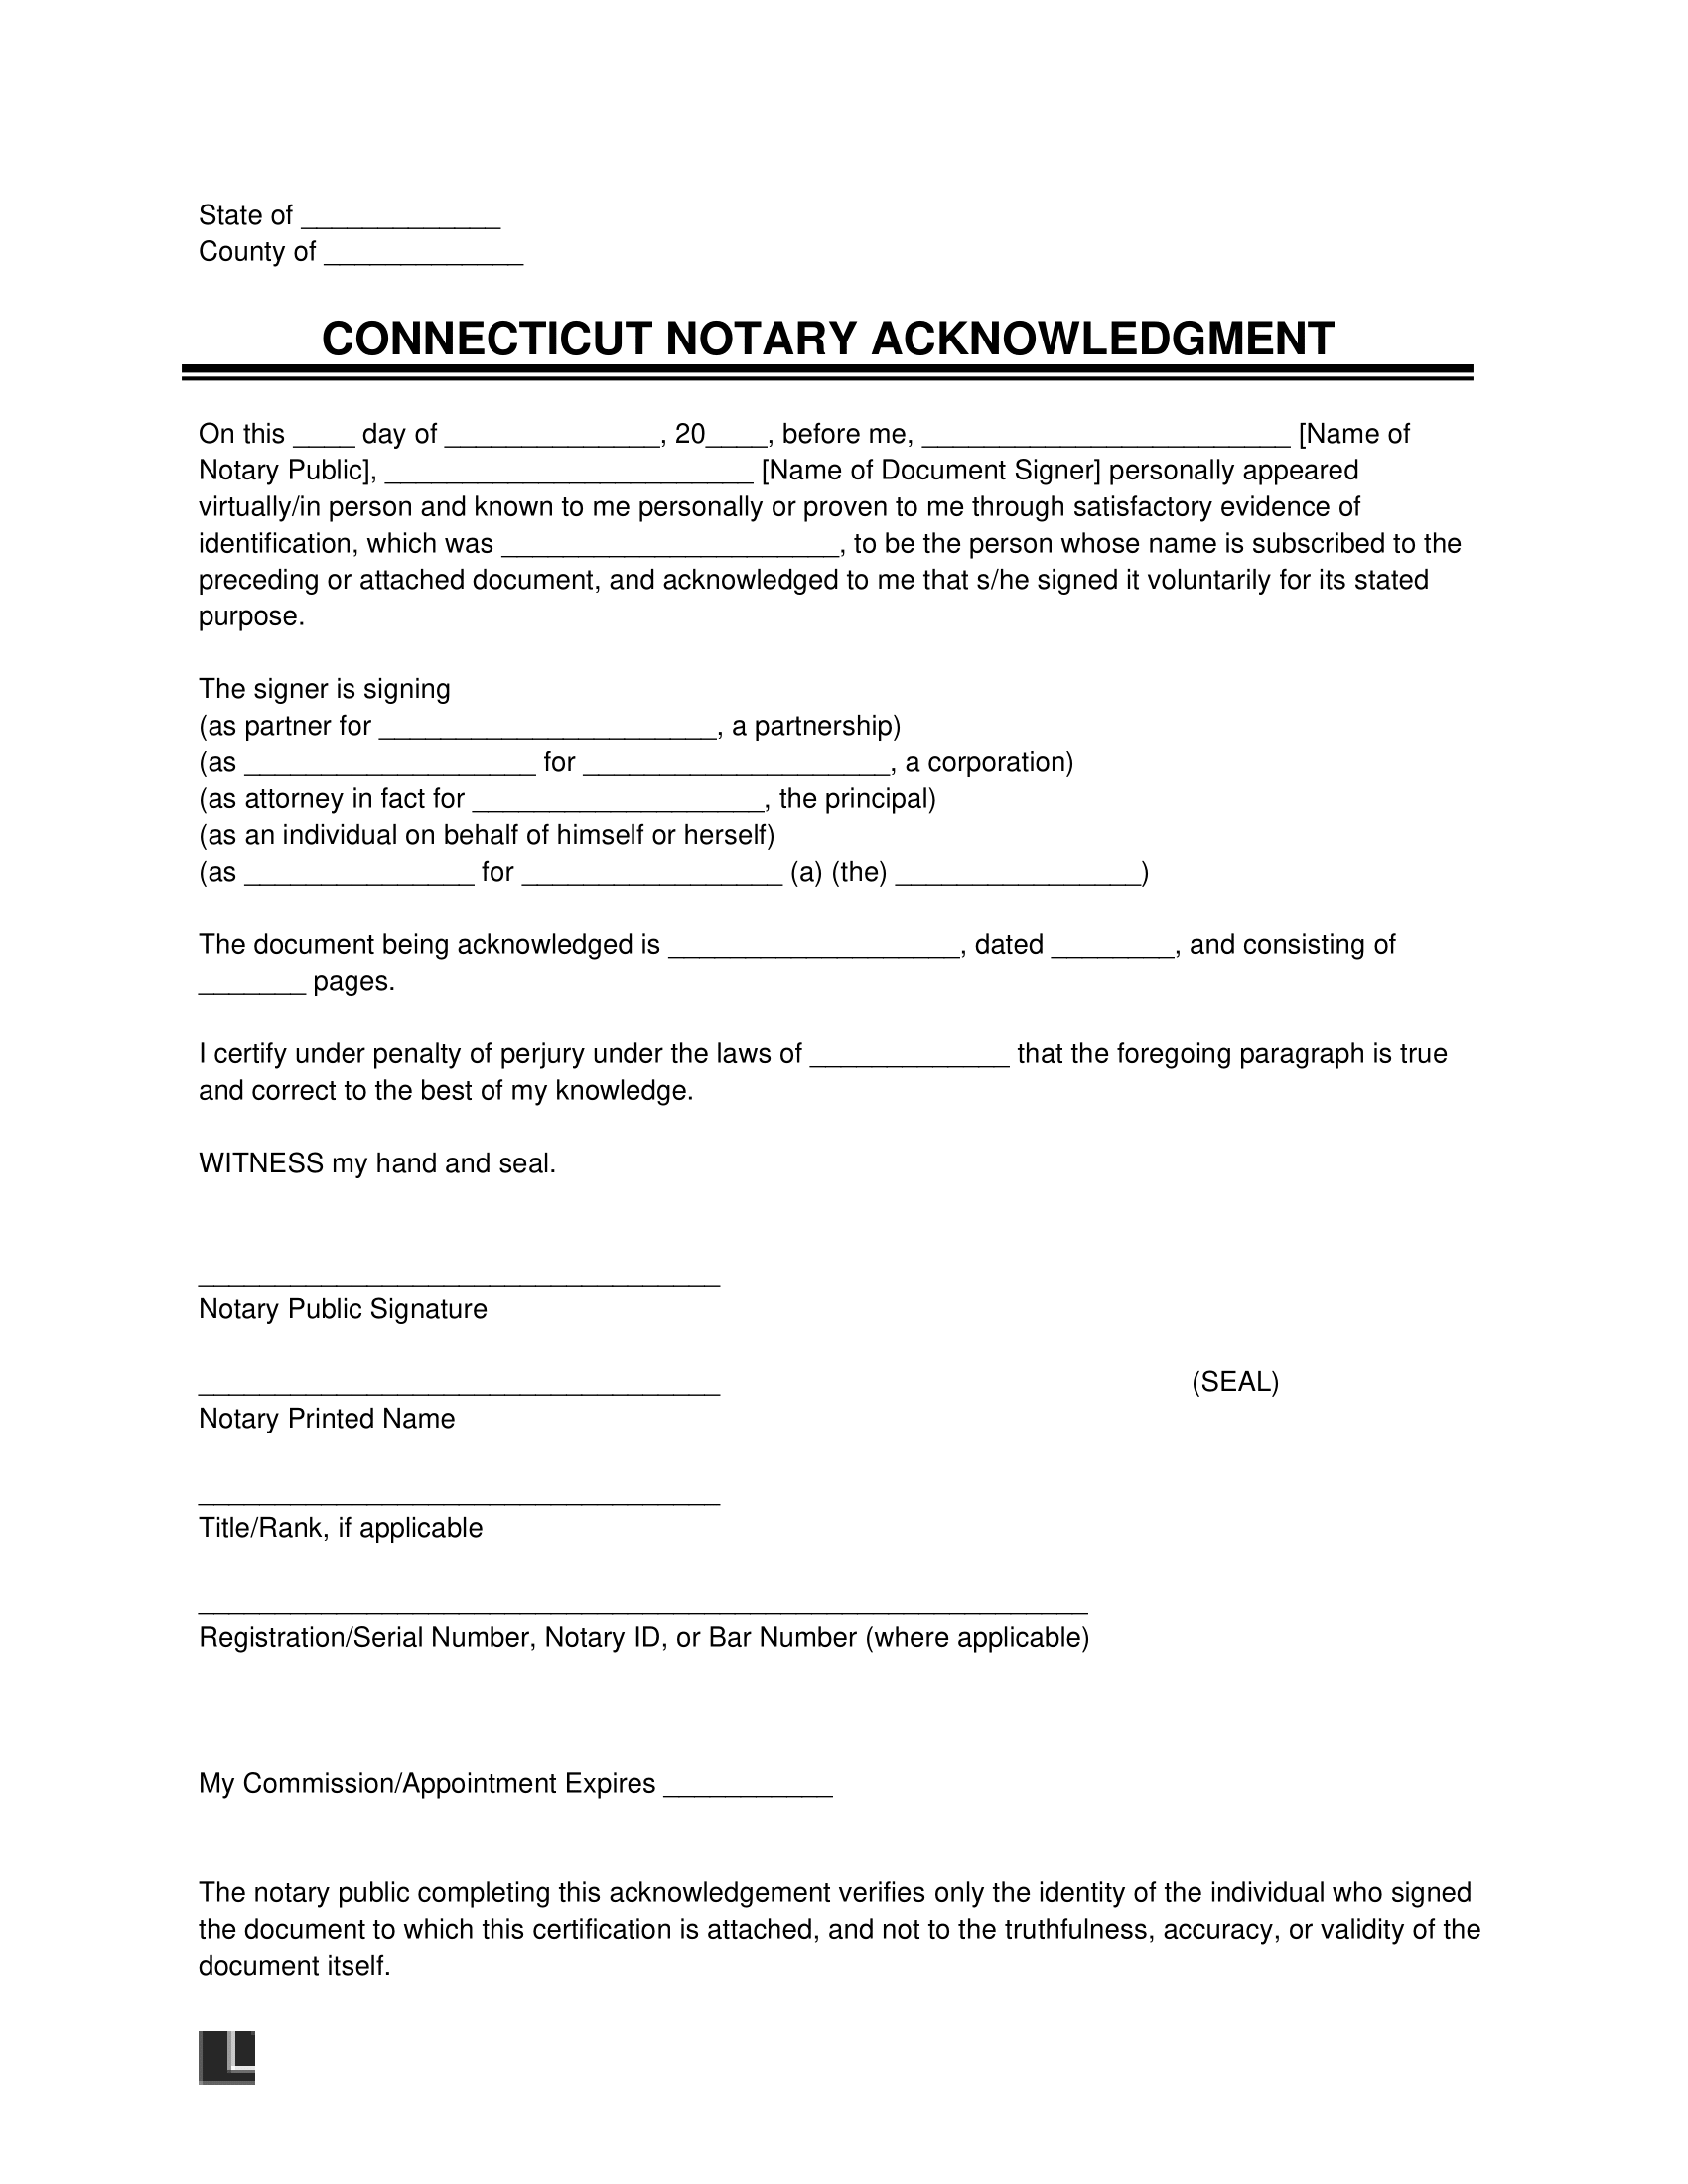 Connecticut Notary Acknowledgment Form